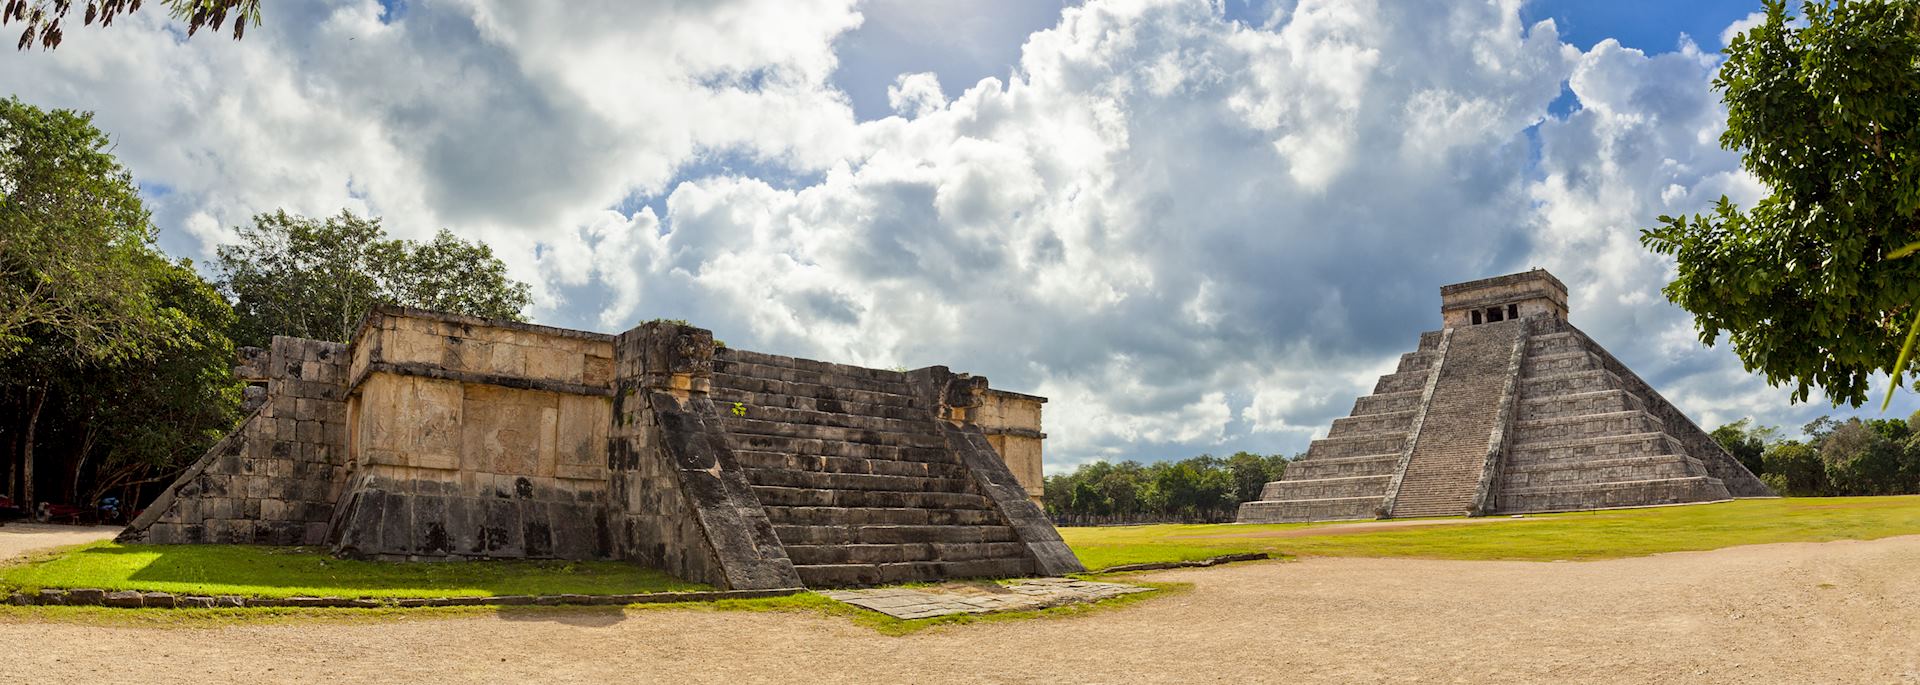 The site of the 12th-century Chichén Itzá